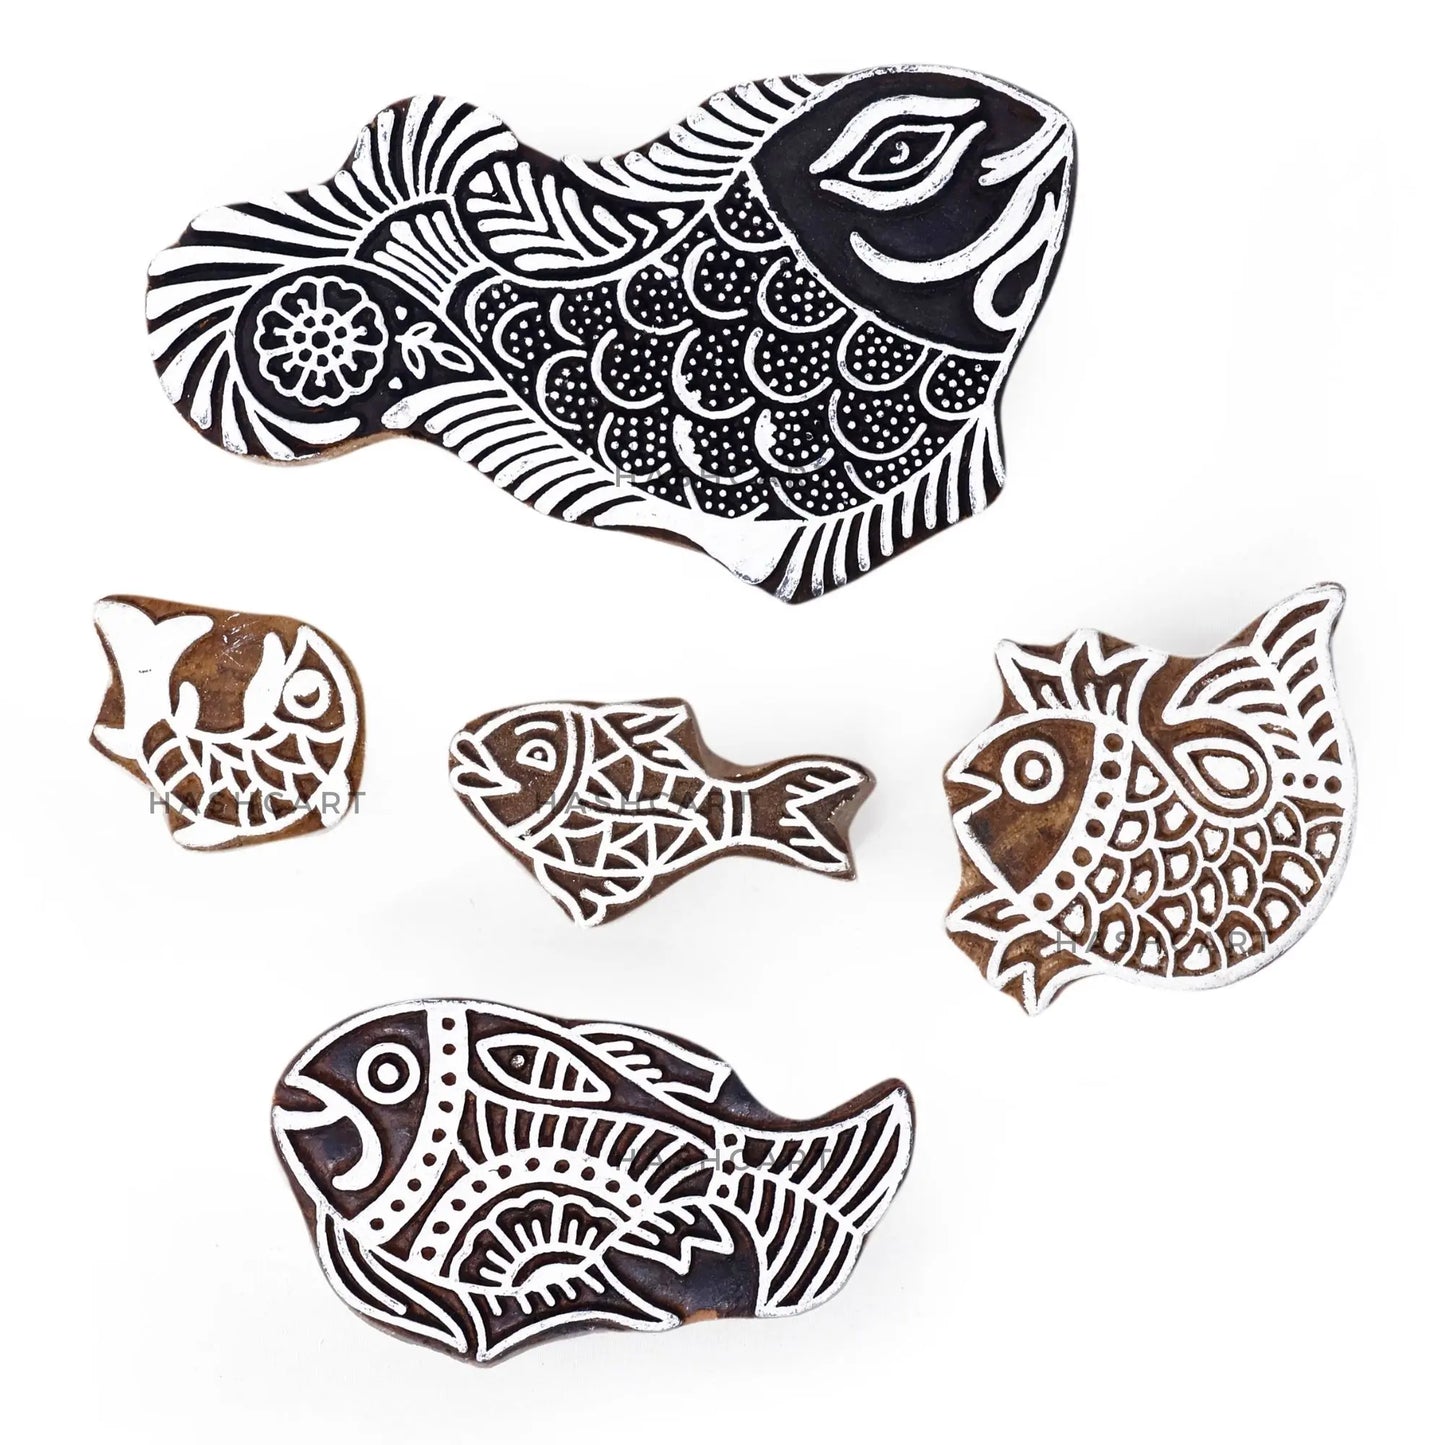 Fishes Wooden Blocks